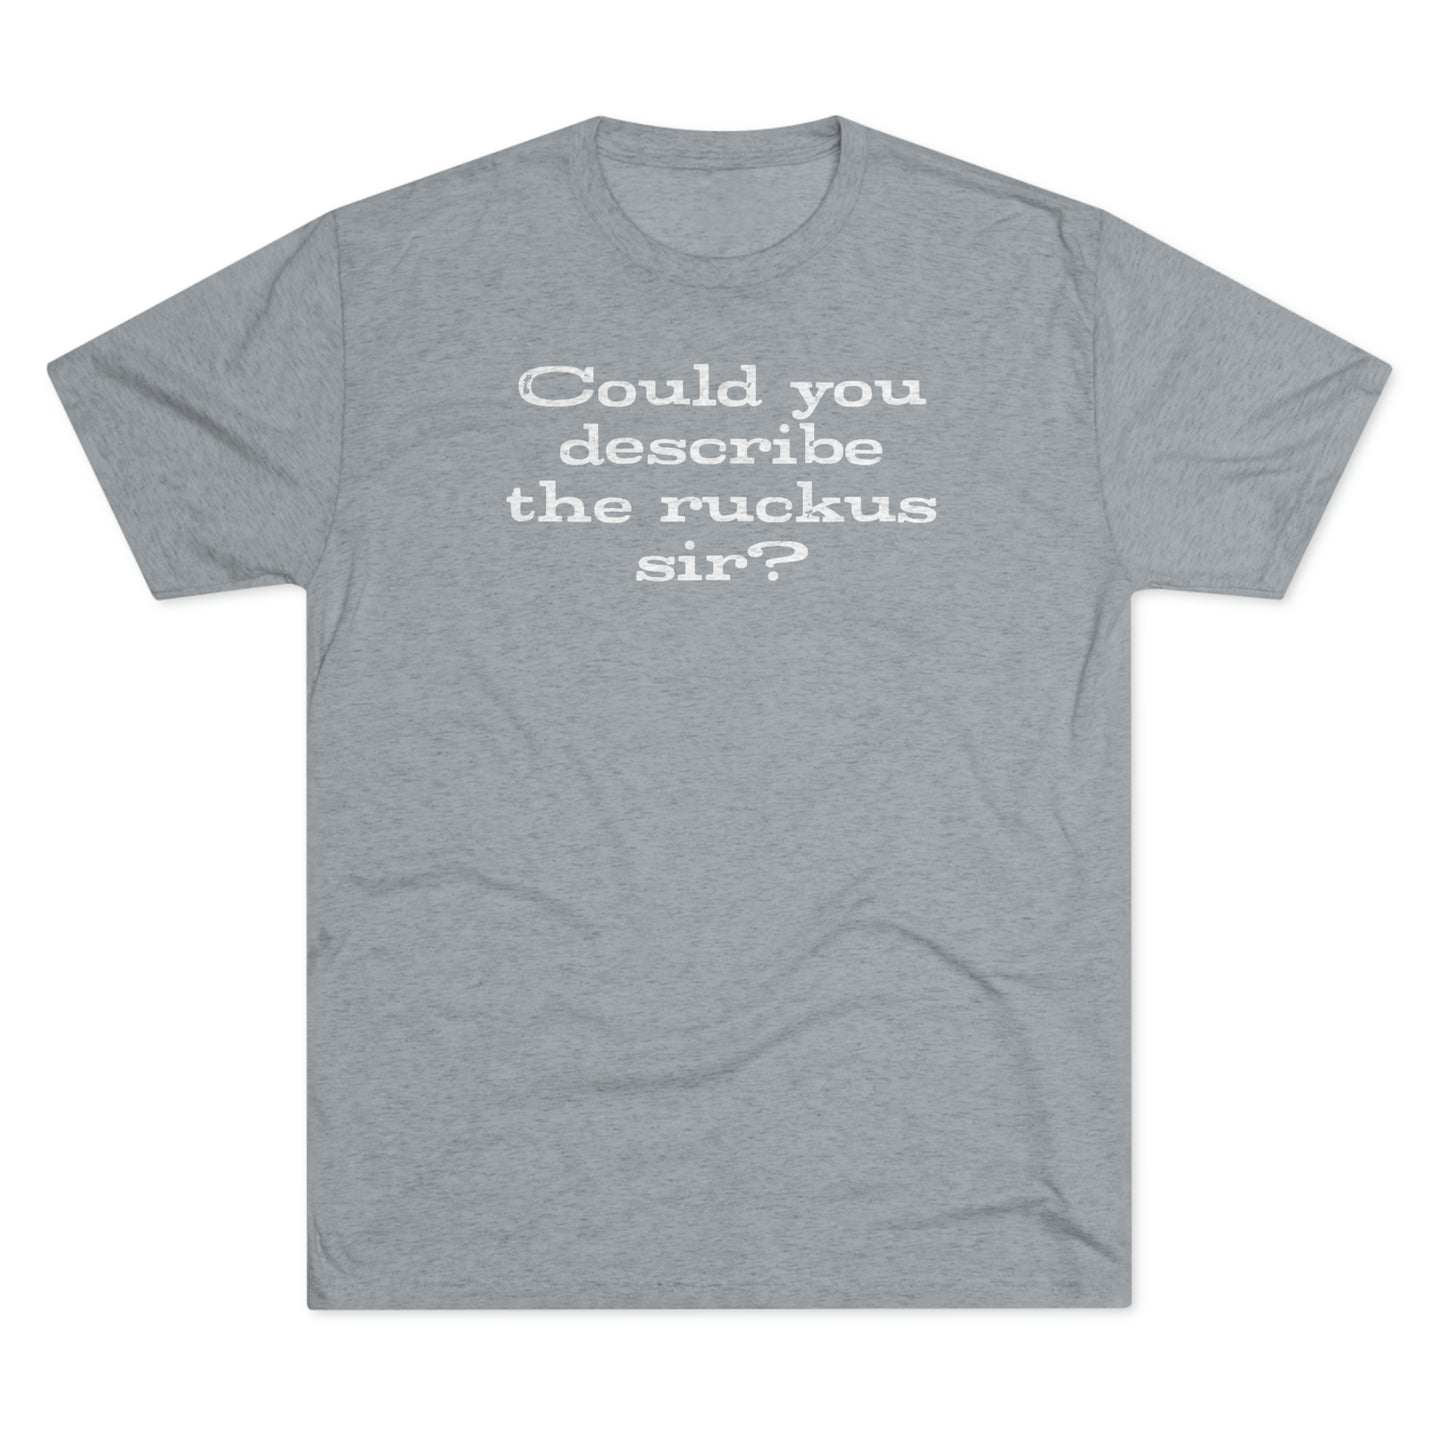 Could You Describe The Ruckus Sir?-Unisex Tri-Blend Crew Tee